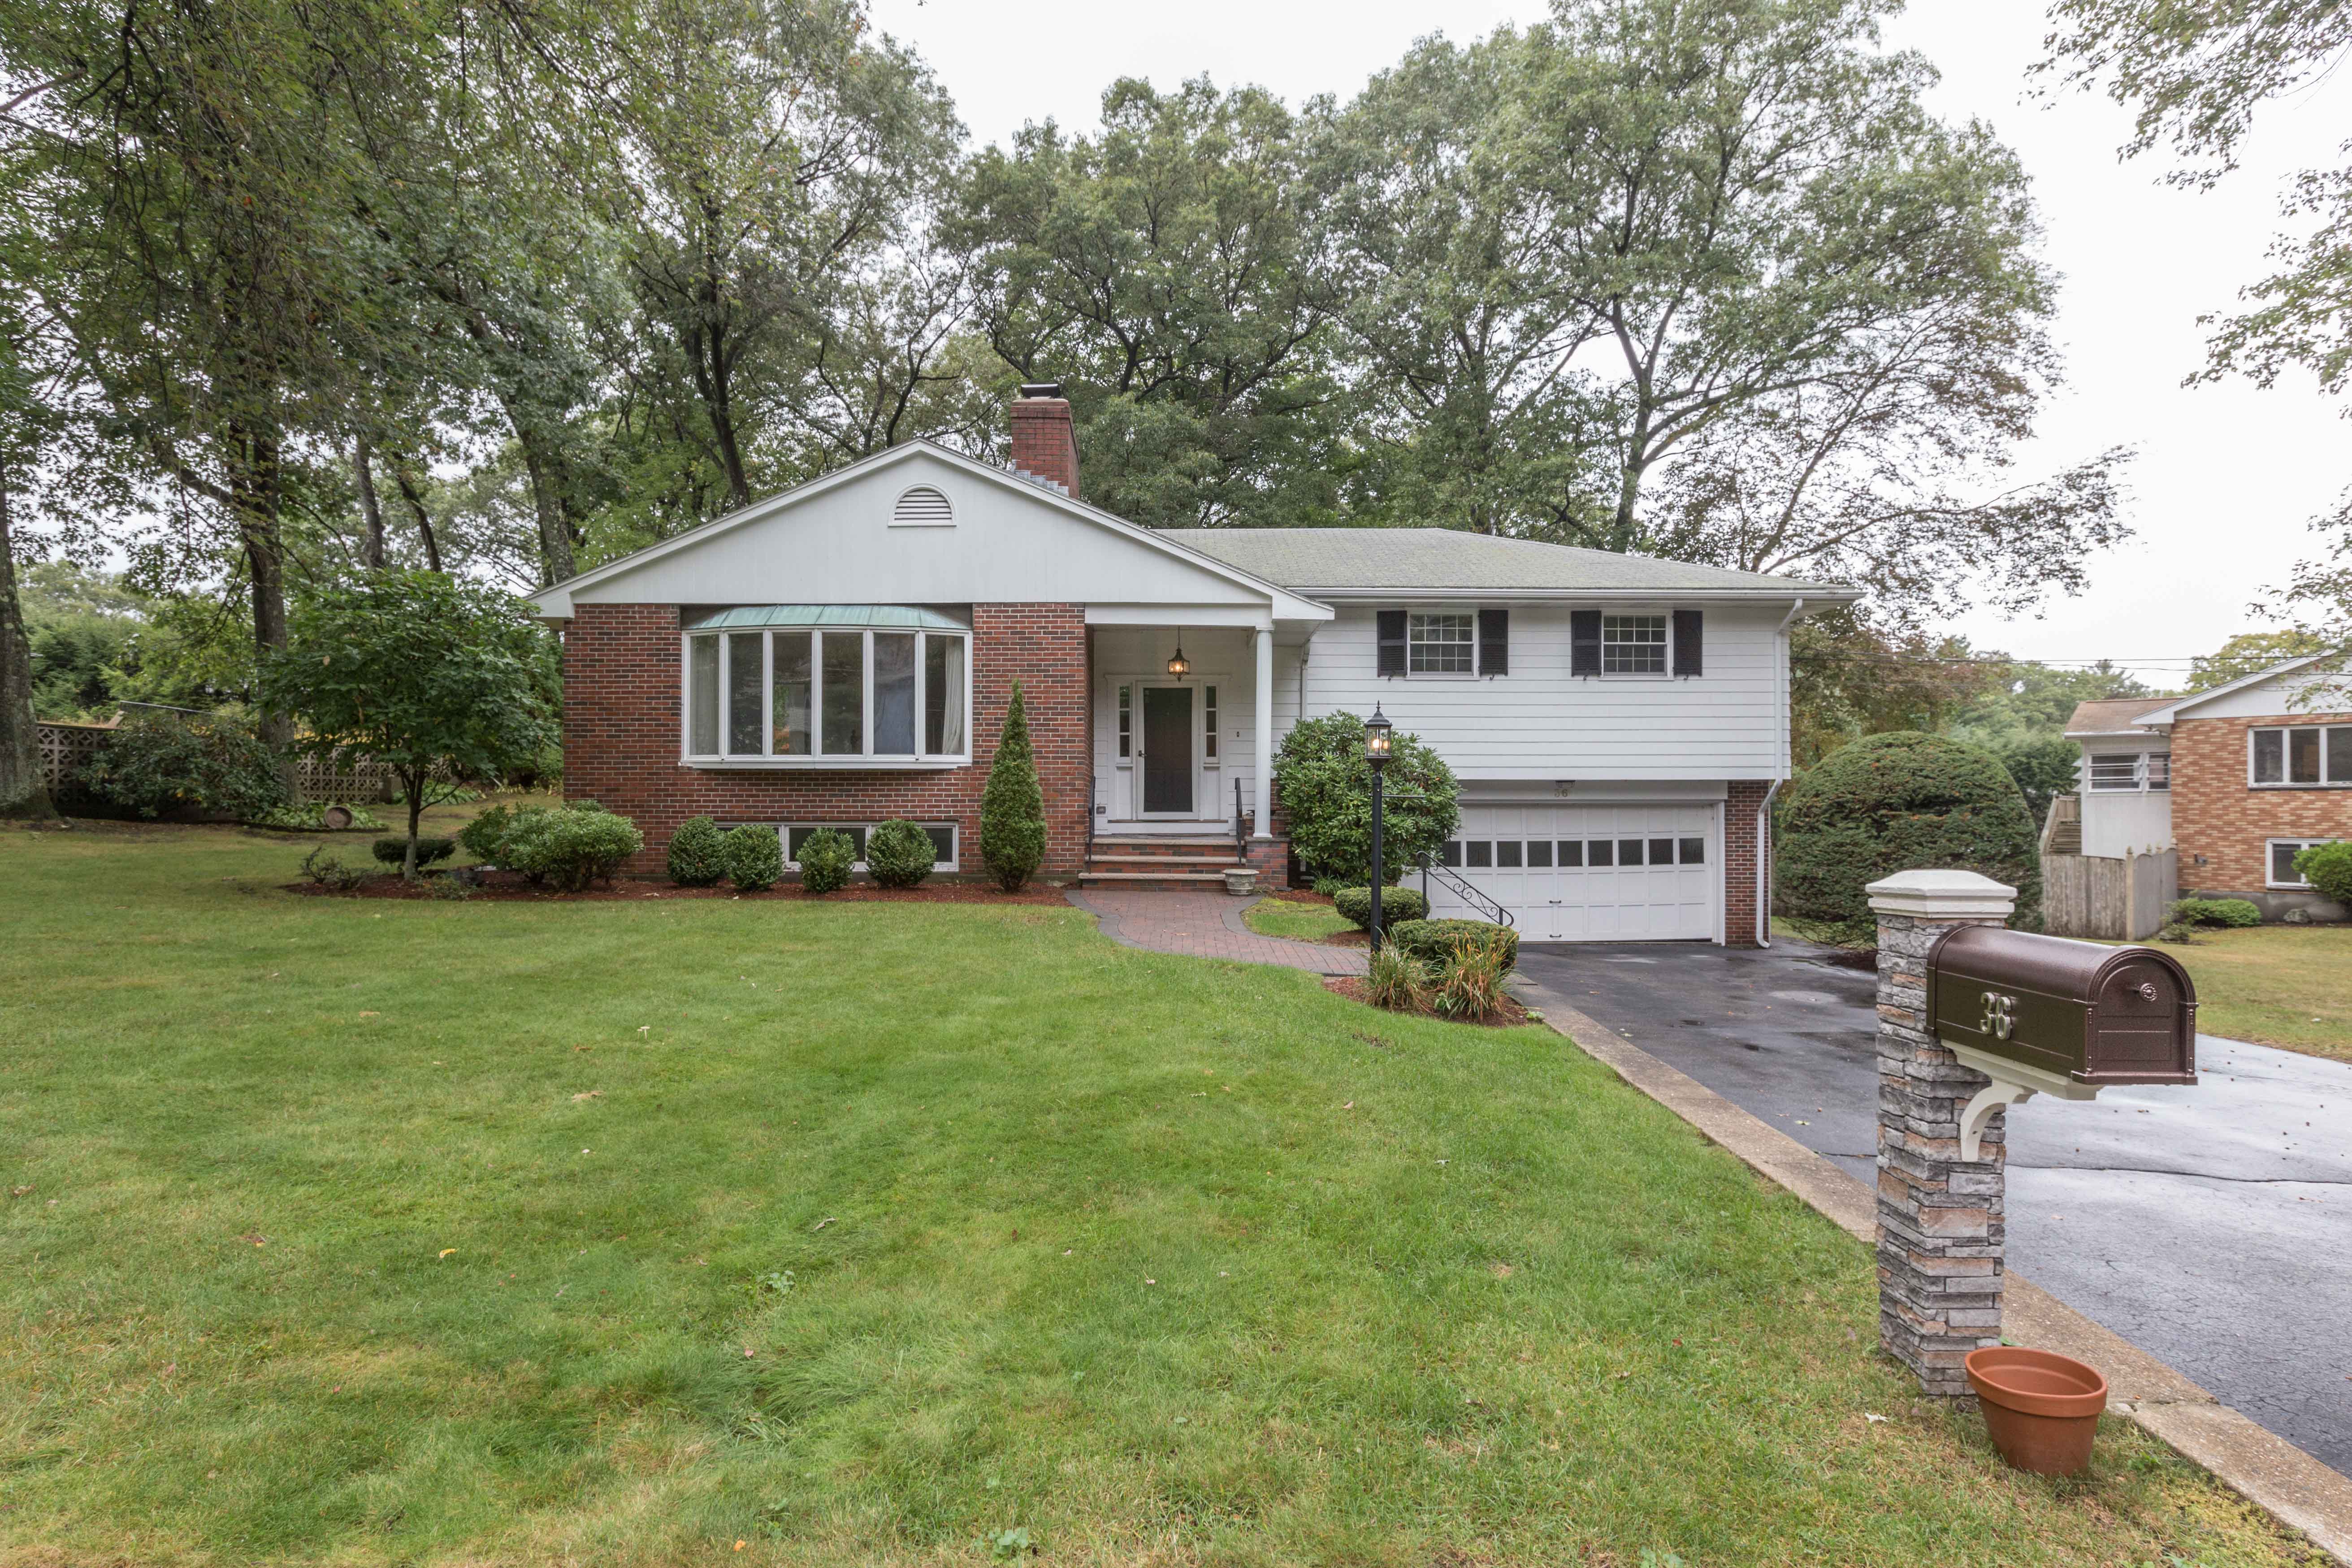 JUST LISTED: Well Maintained Single Family in Waltham